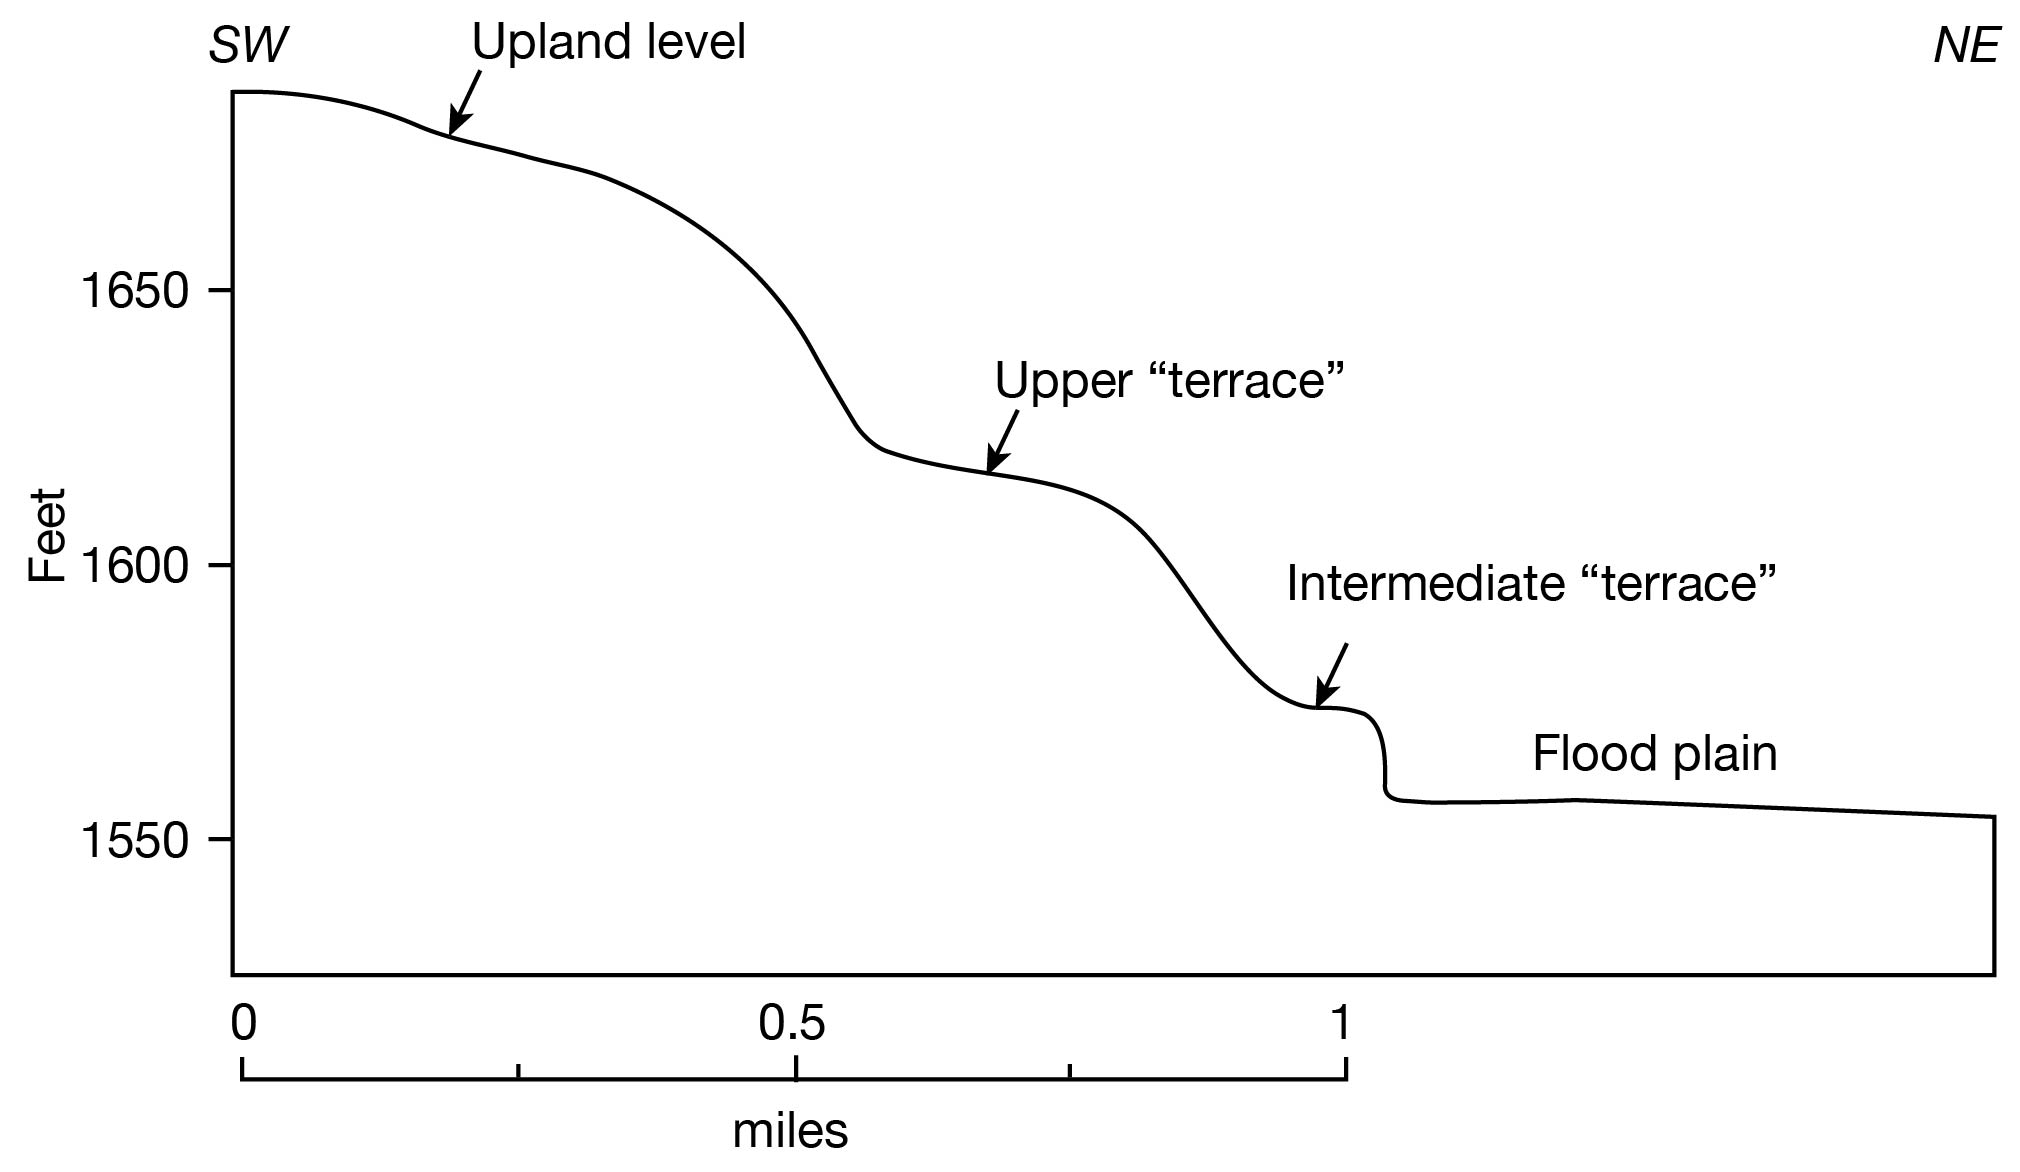 Upland level is about 75 feet above upper terrace, which is about 50 feet above intermediate terrace.